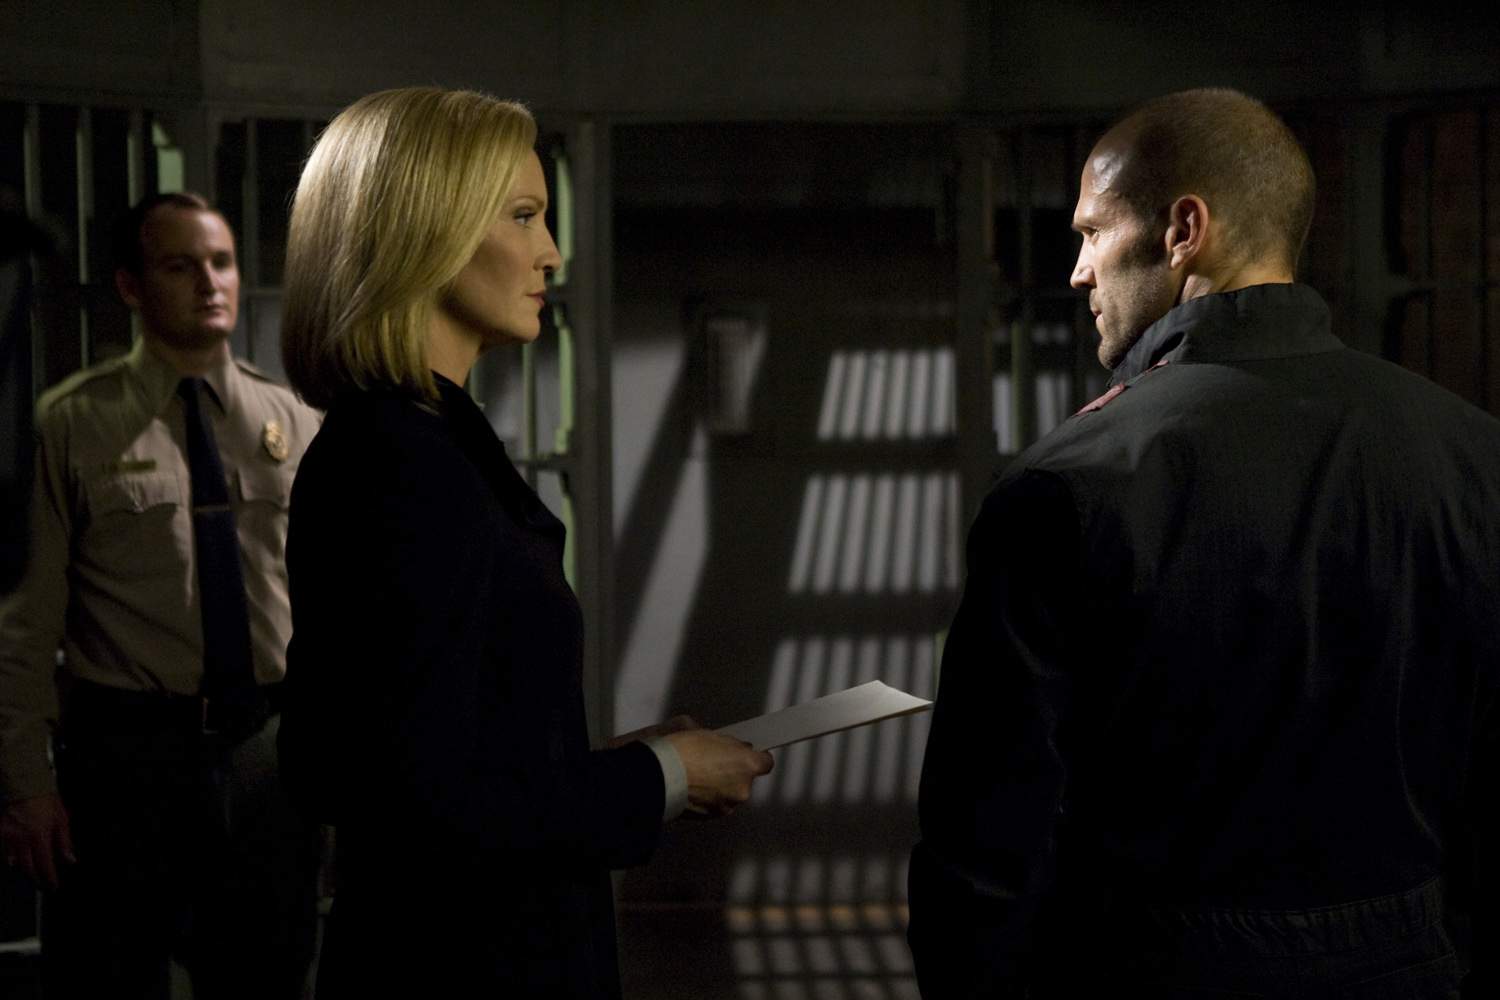 JOAN ALLEN and JASON STATHAM in an action-thriller set in the post-industrial wasteland of tomorrow, with the world's most brutal sporting event as its backdrop - Death Race. Photo Credit: Takashi Seida.